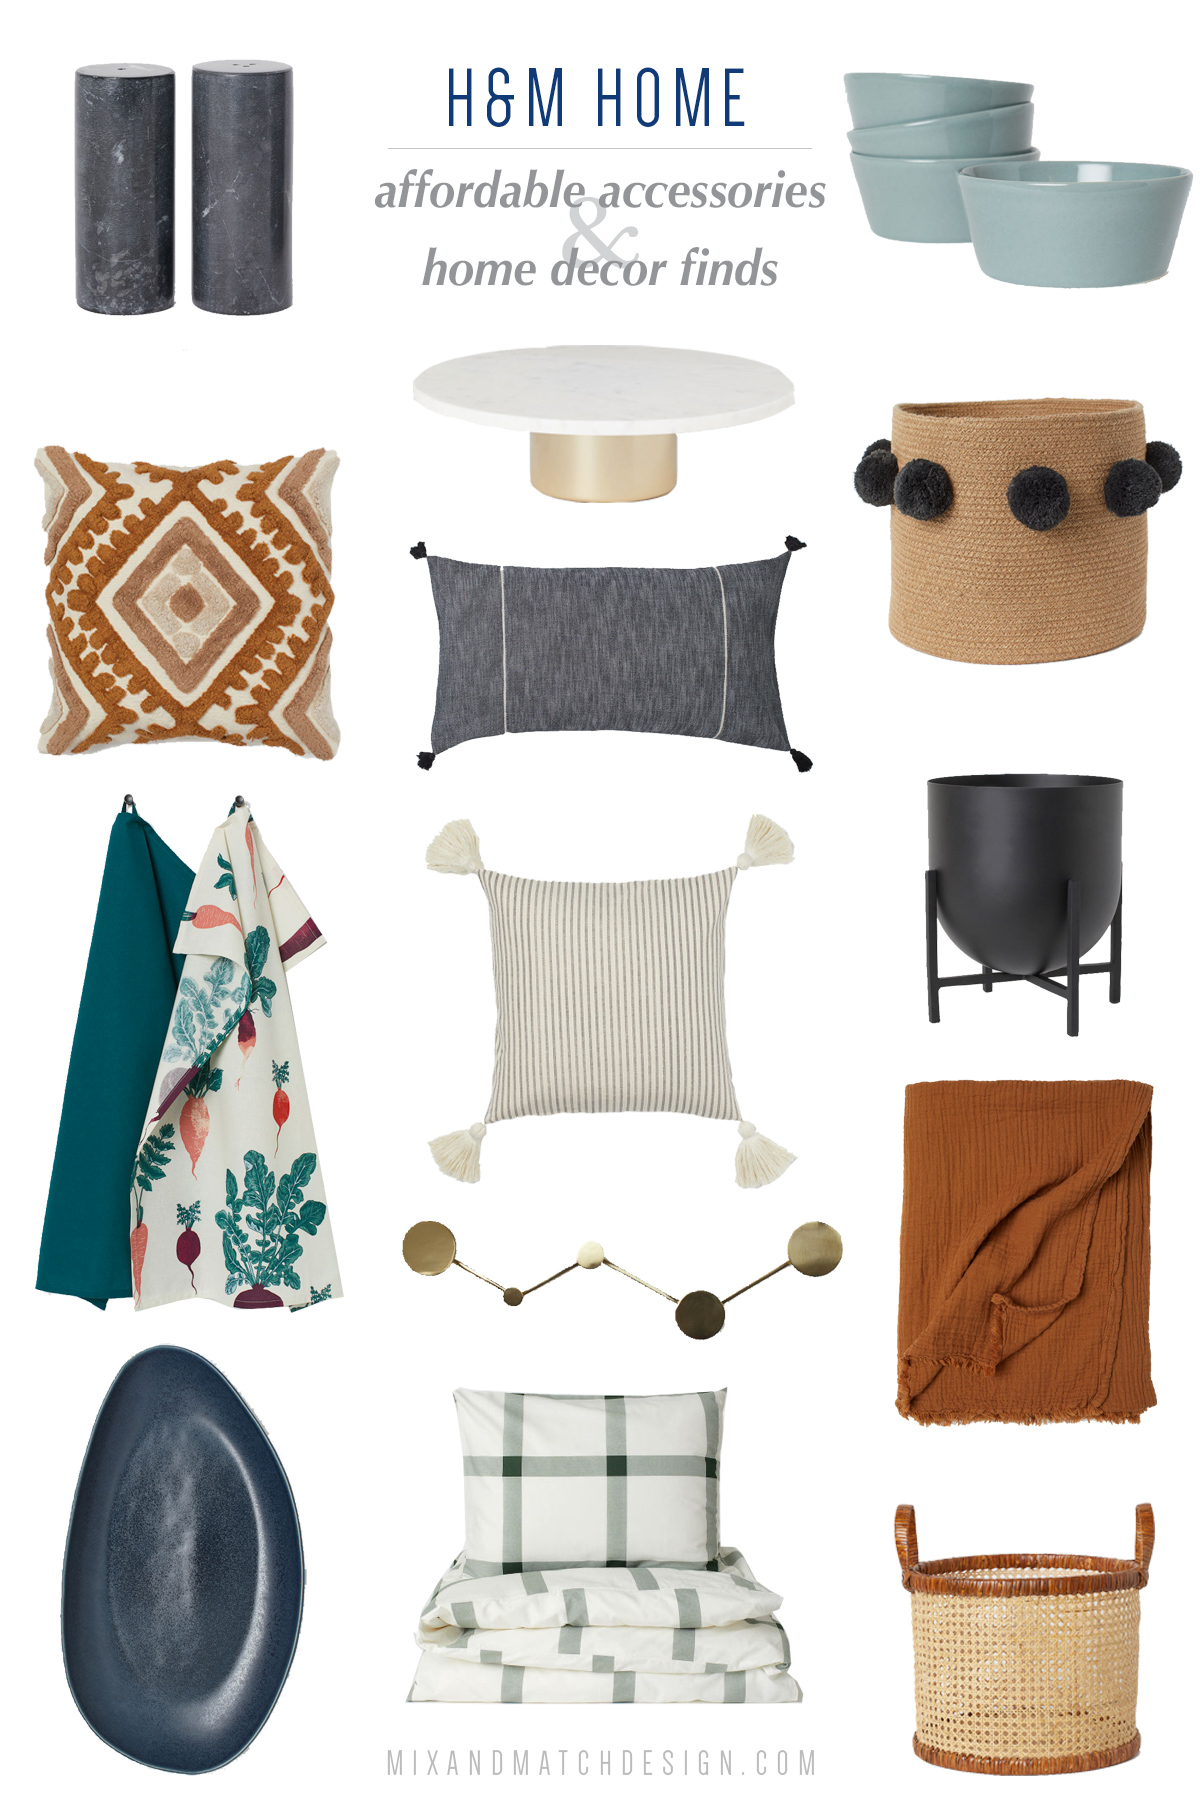 Get the Look: Affordable and Stylish Home Decor Items from H&M Home